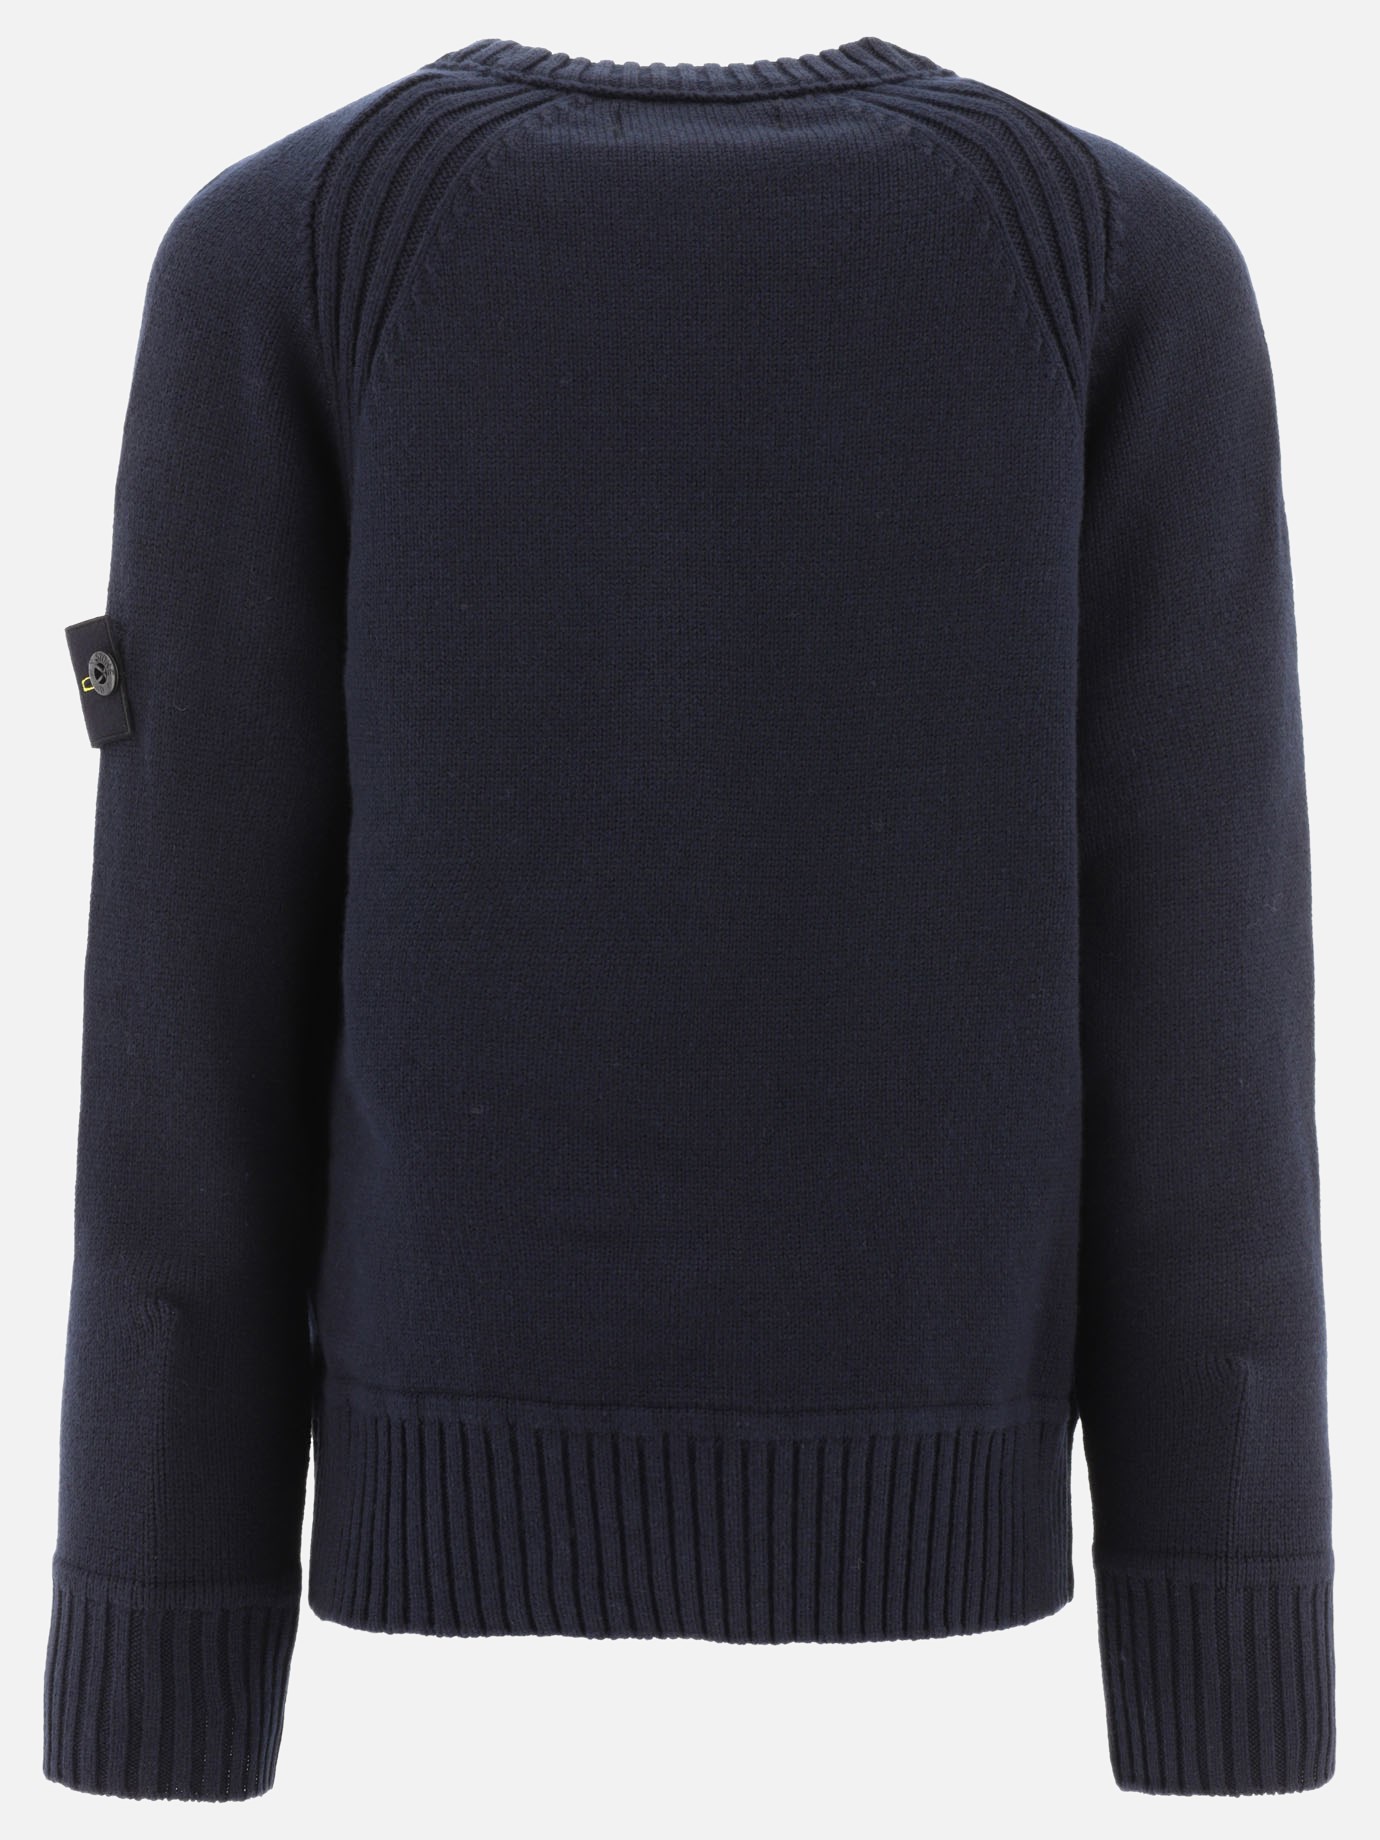  Compass  sweater by Stone Island Junior